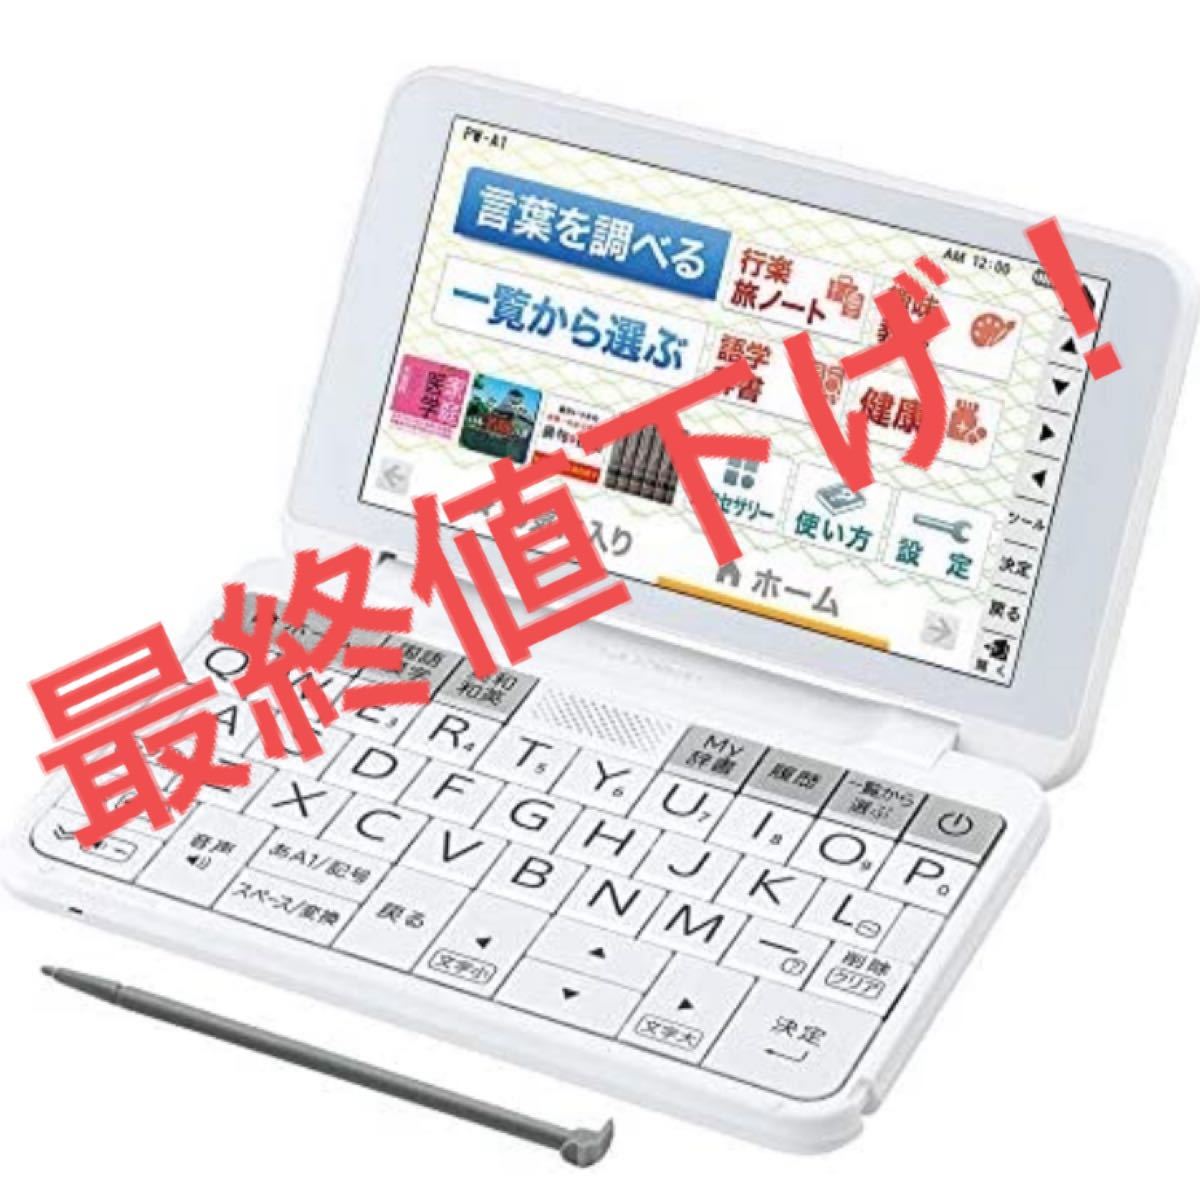 Sharp color electronic dictionary Brain high school model white series PW-G5300-W 